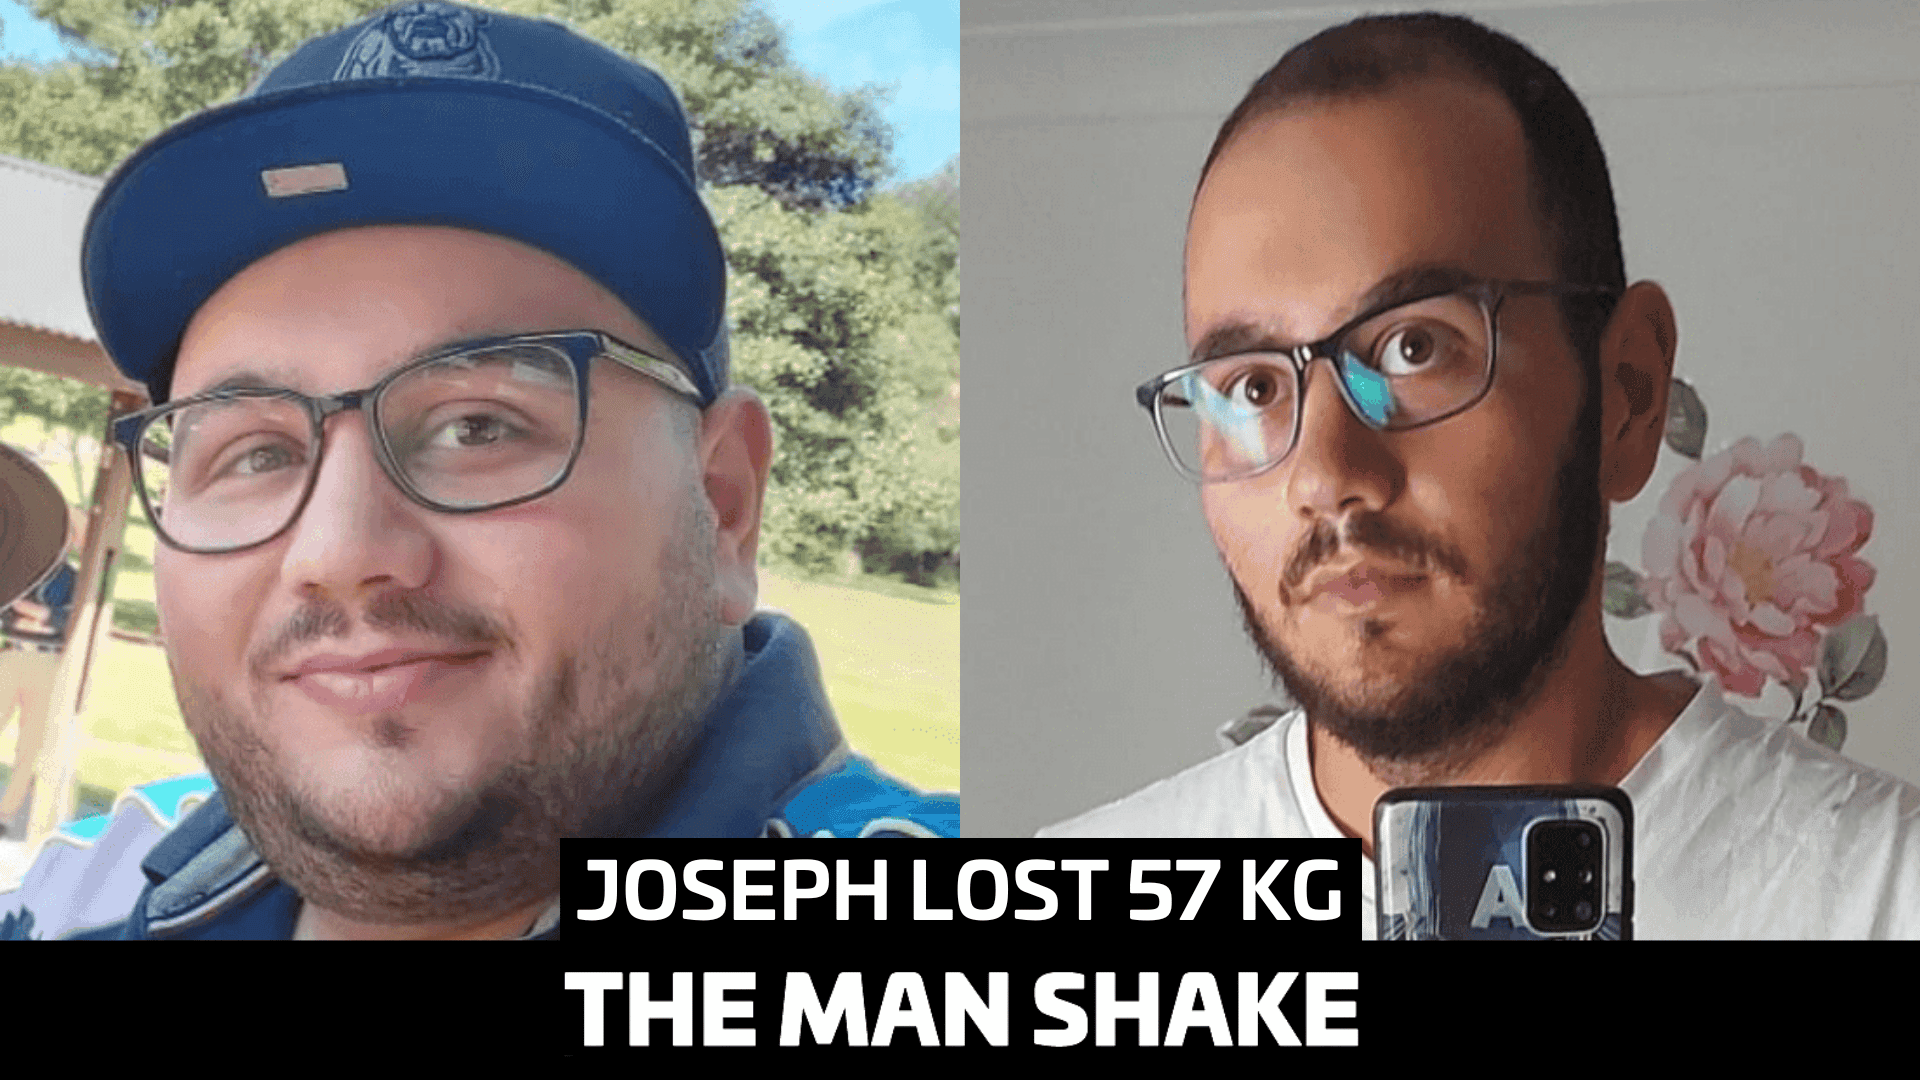 Joseph had enough of being the "big guy" and lost 57kg